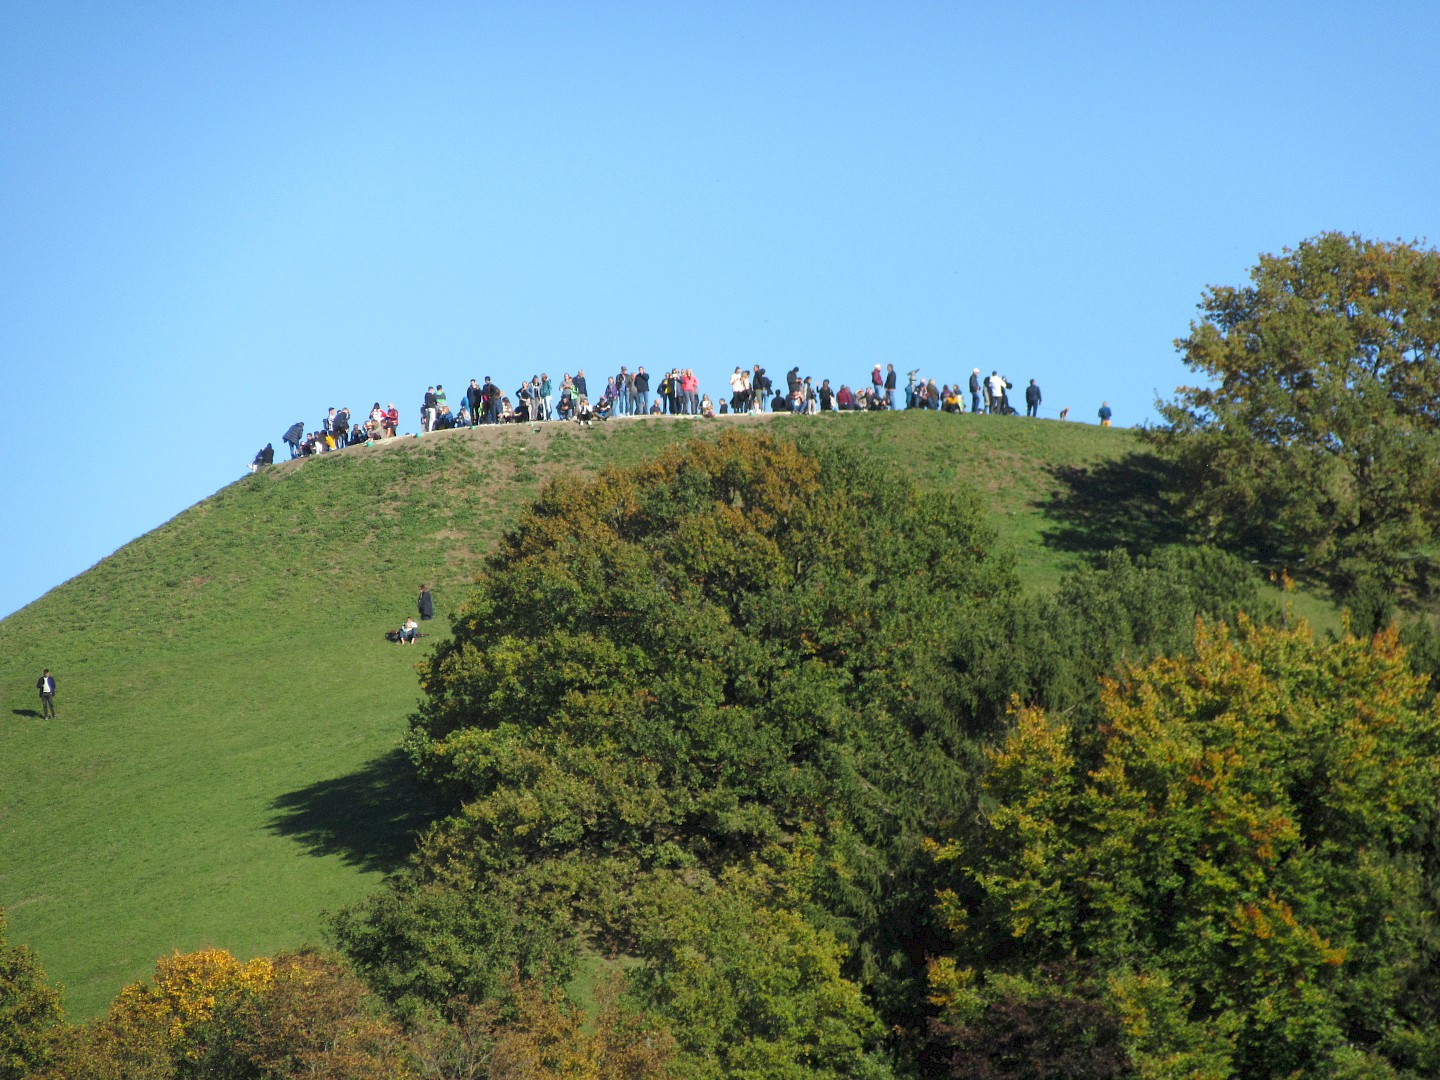 Many people standing on the top of the Olympic mountain